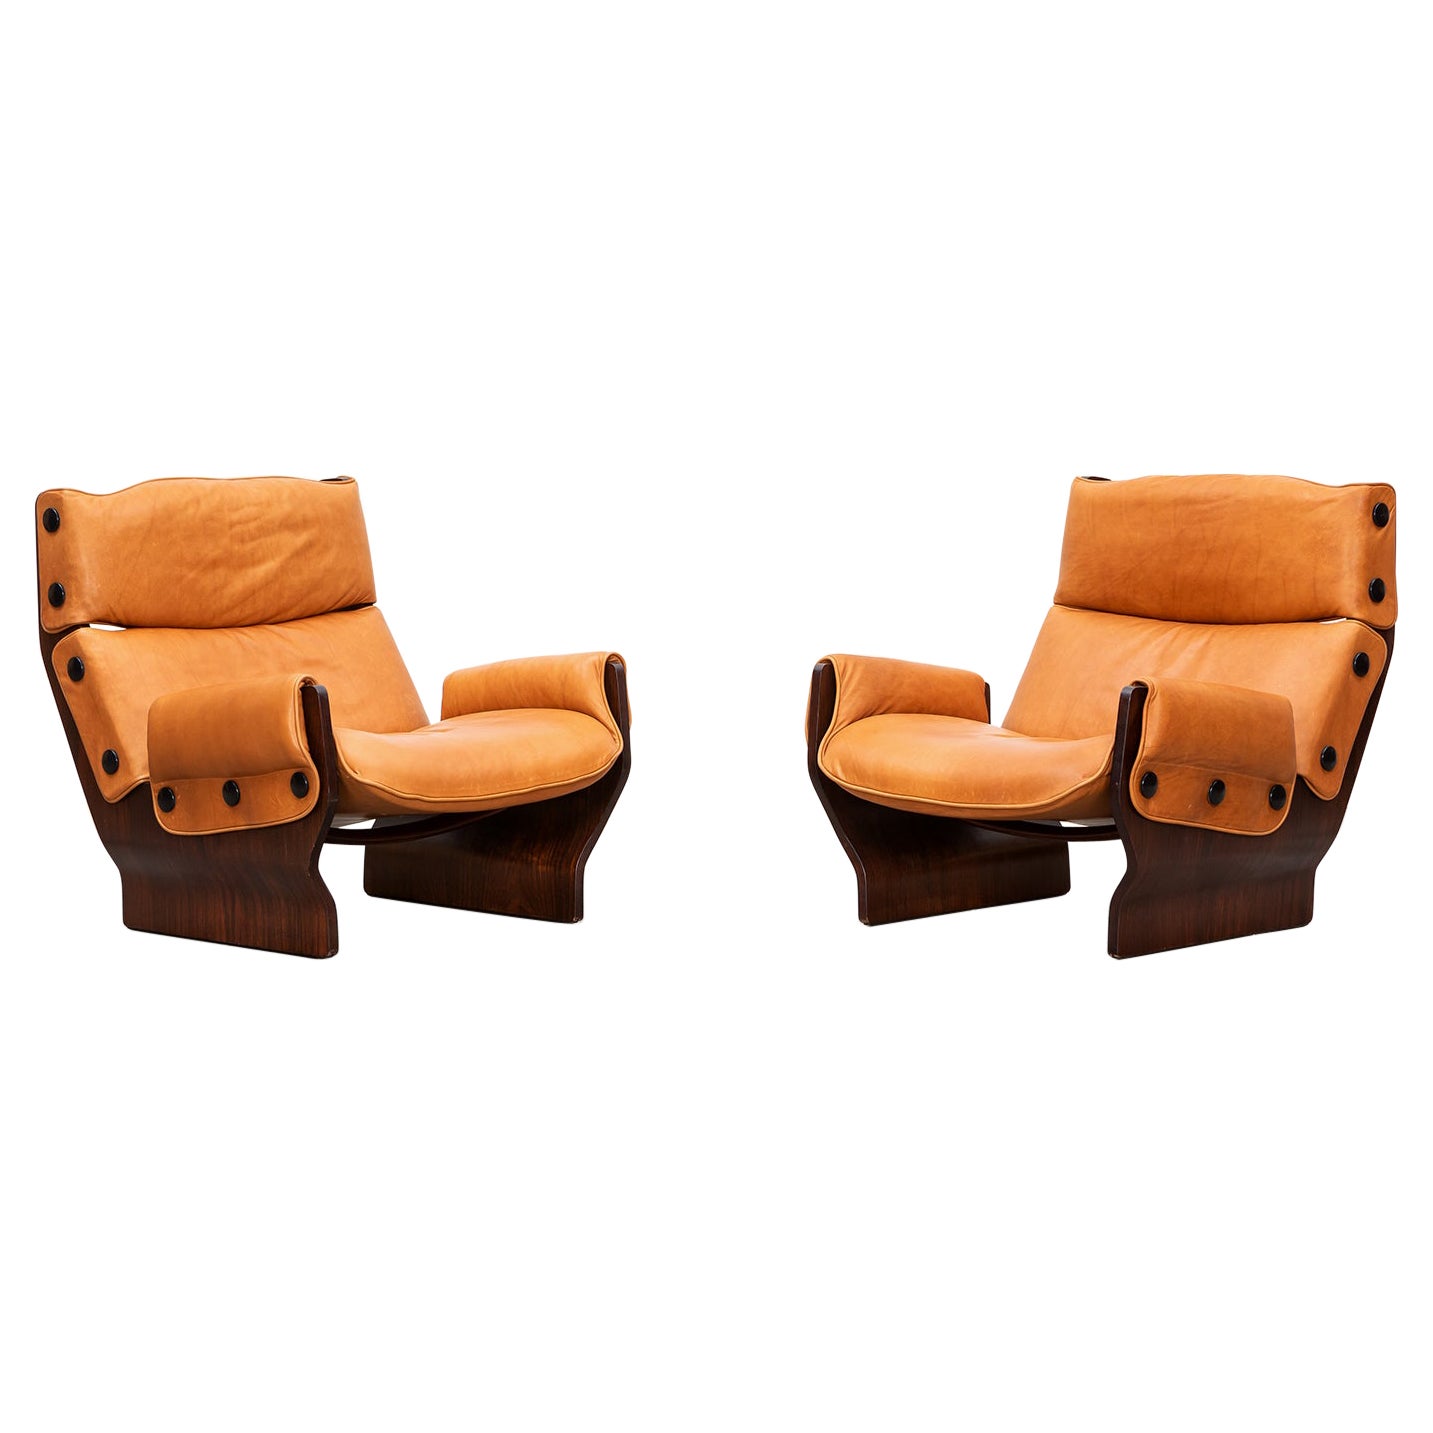 1960s Wood and Leather Pair of Lounge Chairs by Osvaldo Borsani